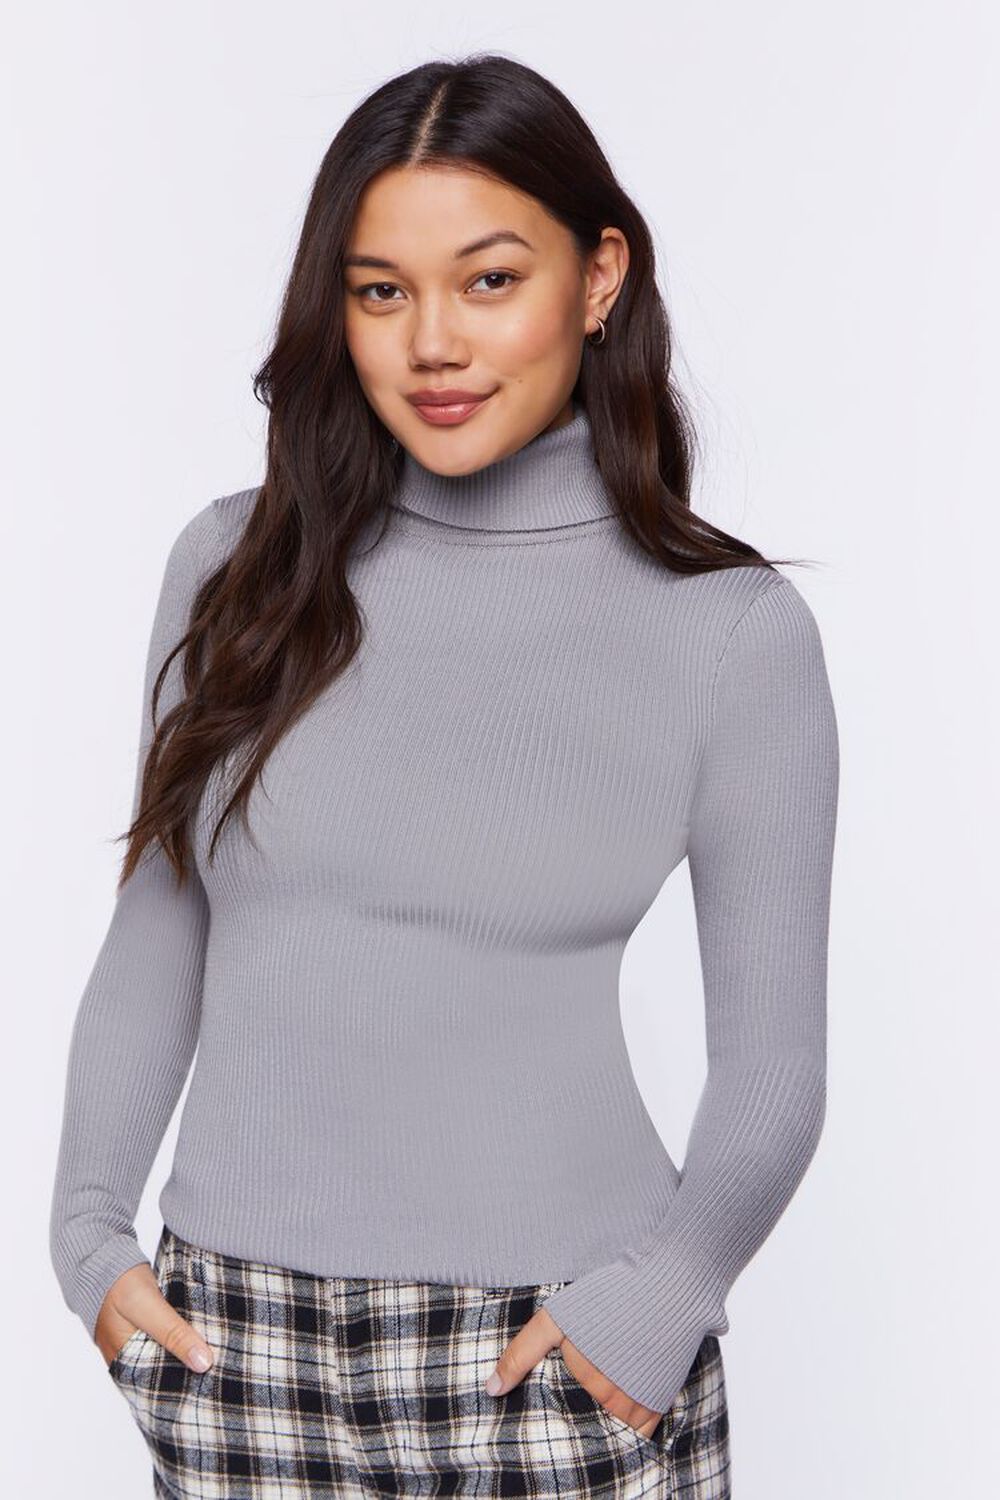 GREY Ribbed Turtleneck Sweater-Knit Top, image 1